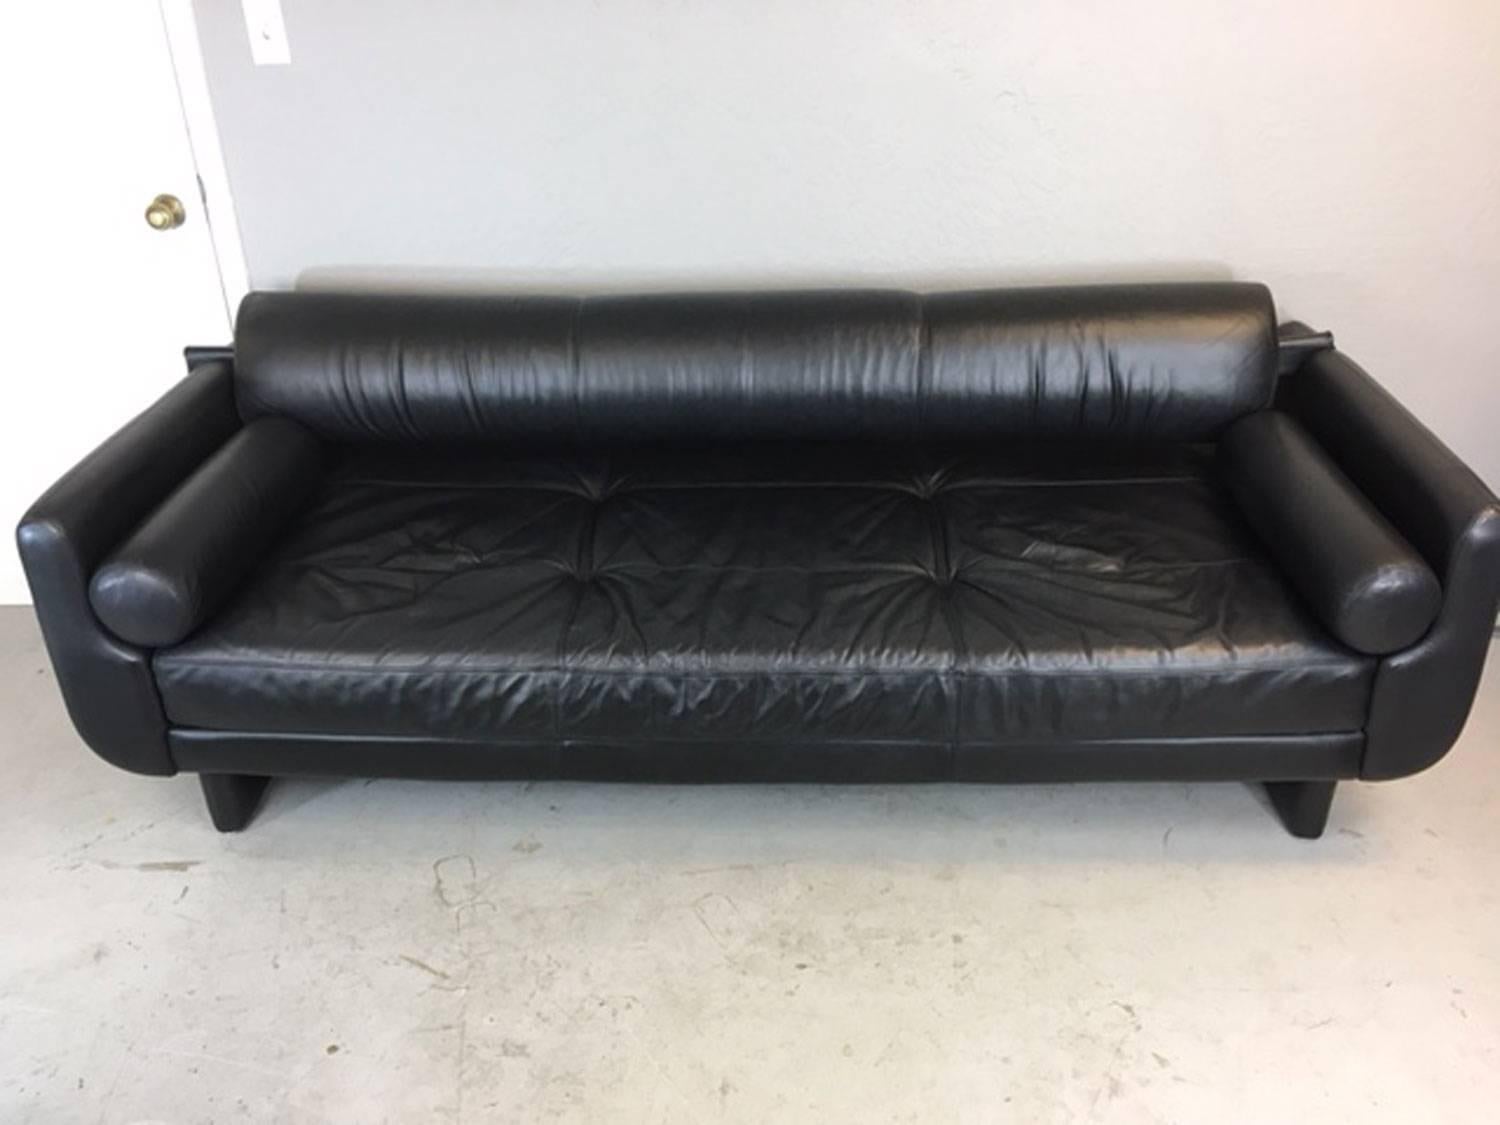 A Vladimir Kagan Matinee sofa made by American leather. A discontinued design that is reminiscent of an earlier Kagan sofa. The back cushion is removable to convert it into a daybed. This sofa also comes with two red Tootsie roll throw pillows that